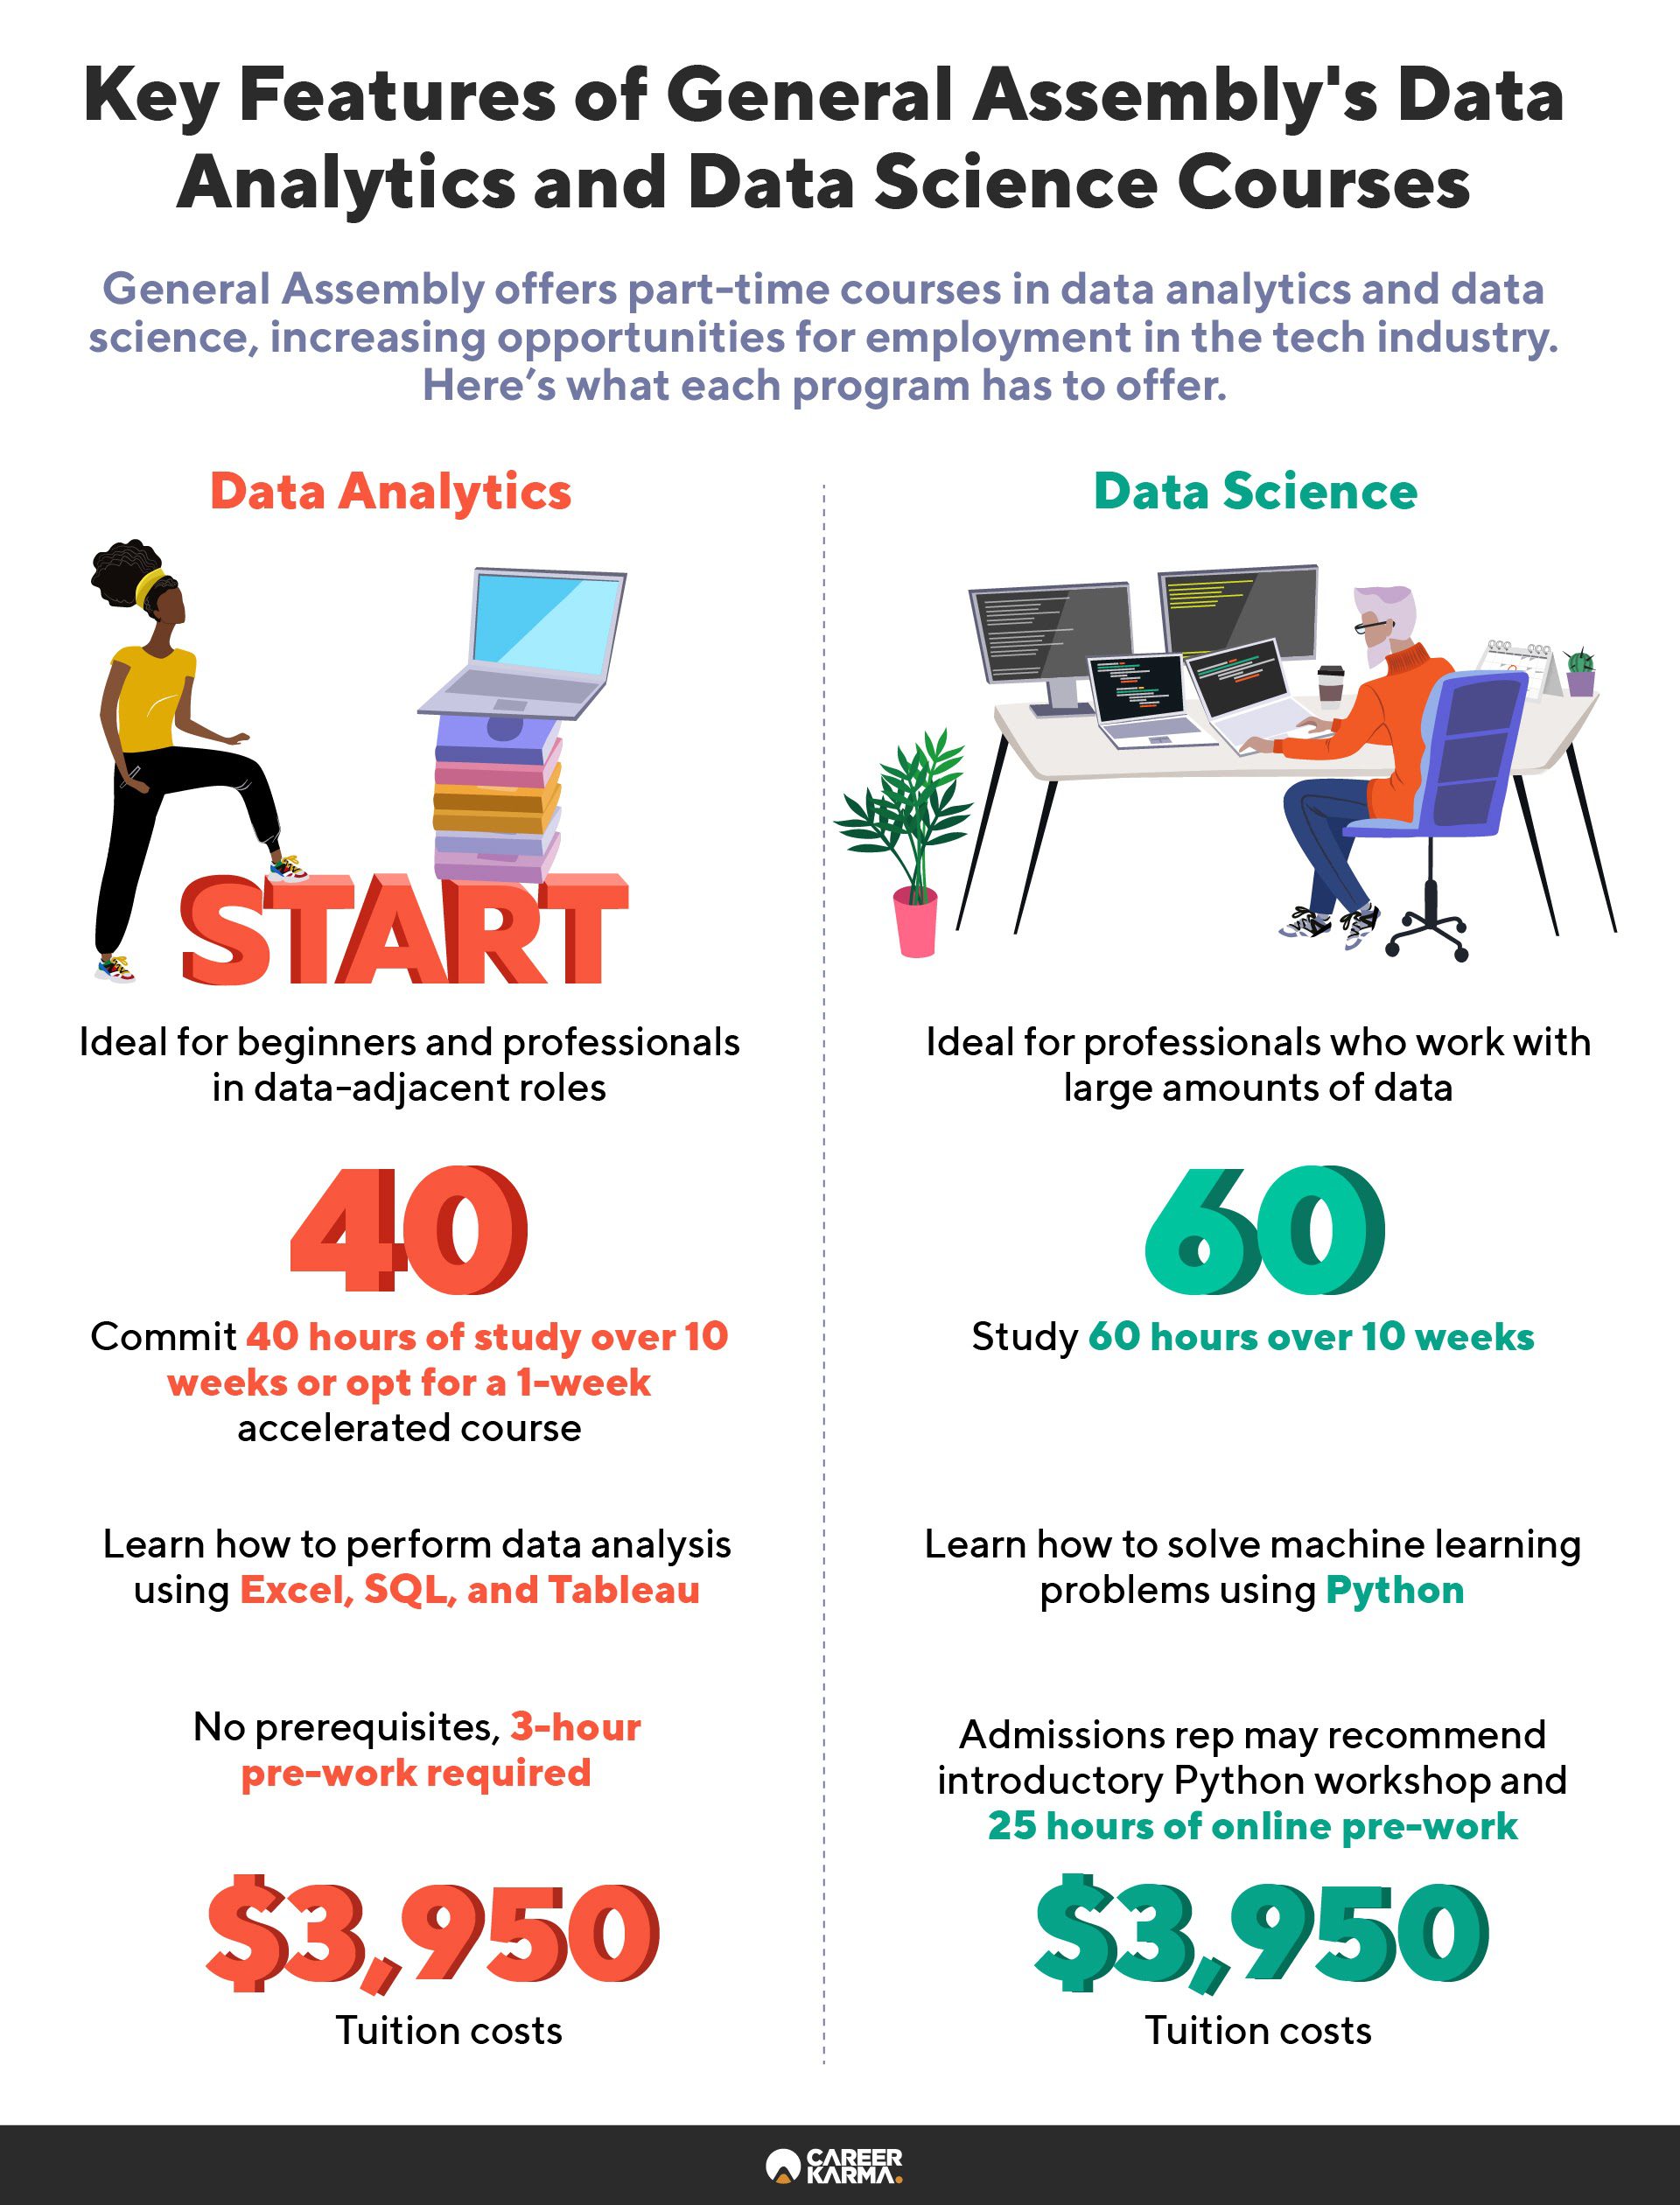 An infographic comparing the key features of General Assembly’s part-time data analytics and data science courses